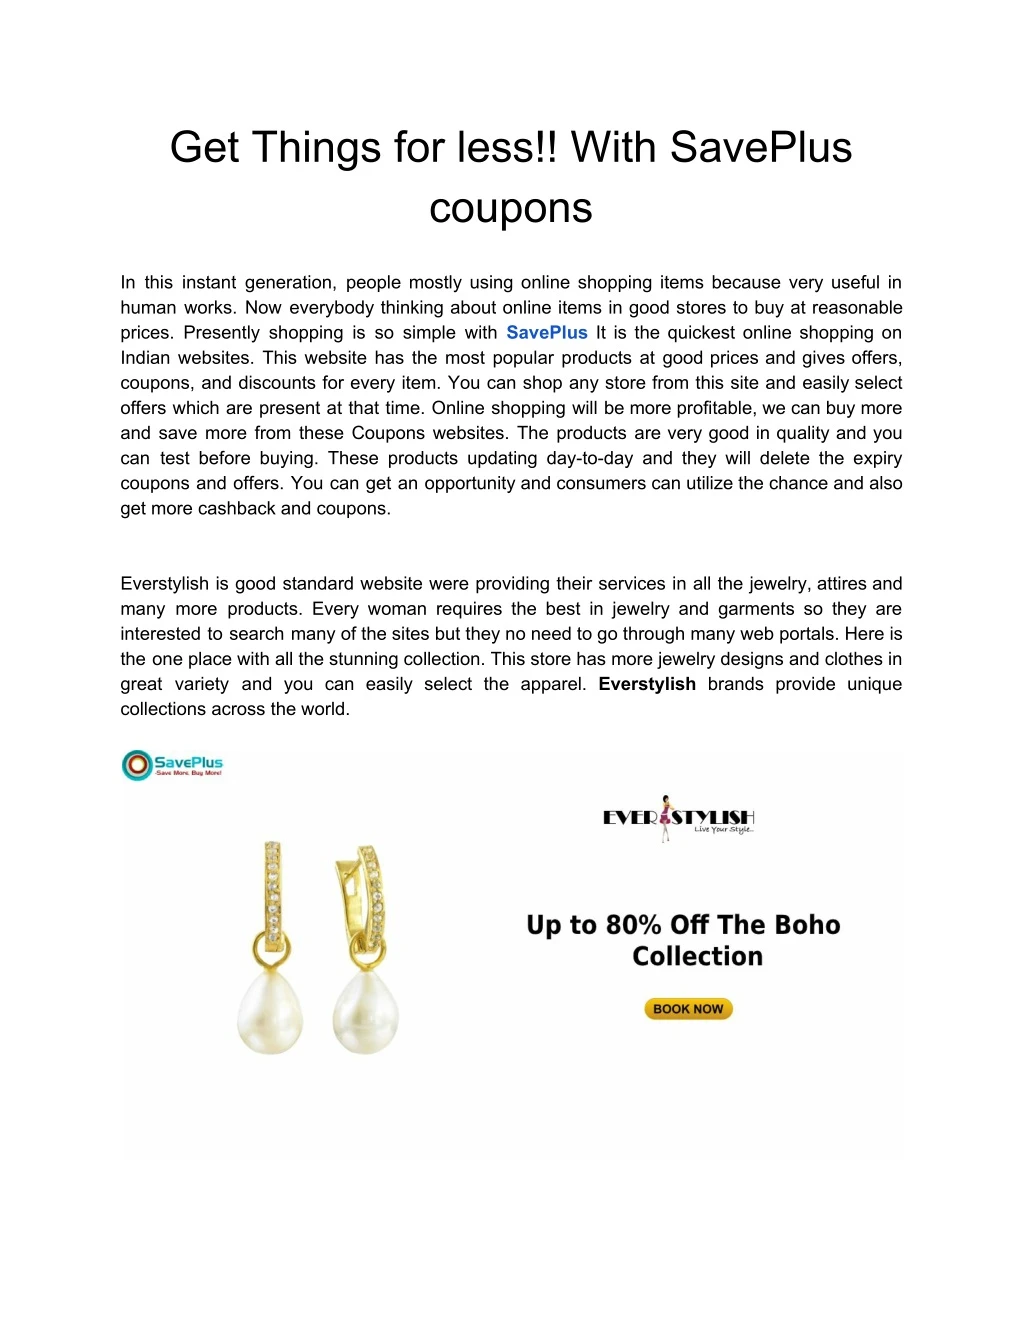 get things for less with saveplus coupons